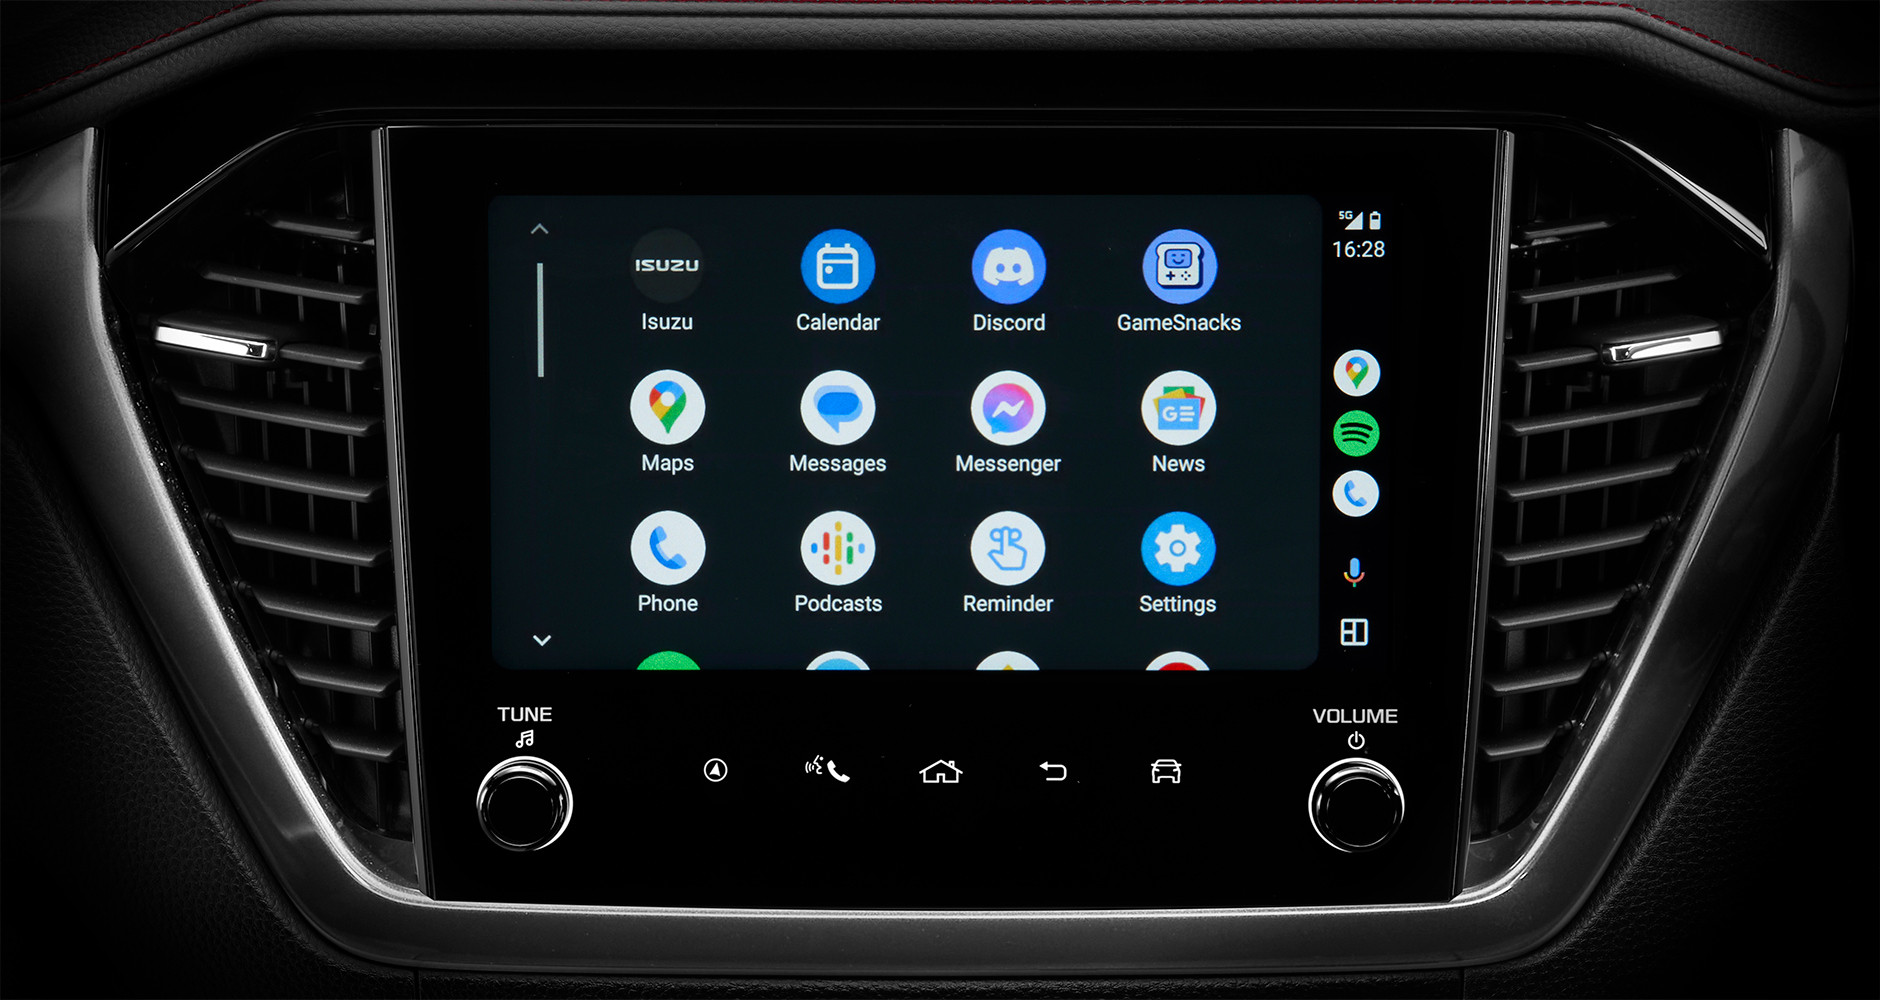  Wireless Android Auto™